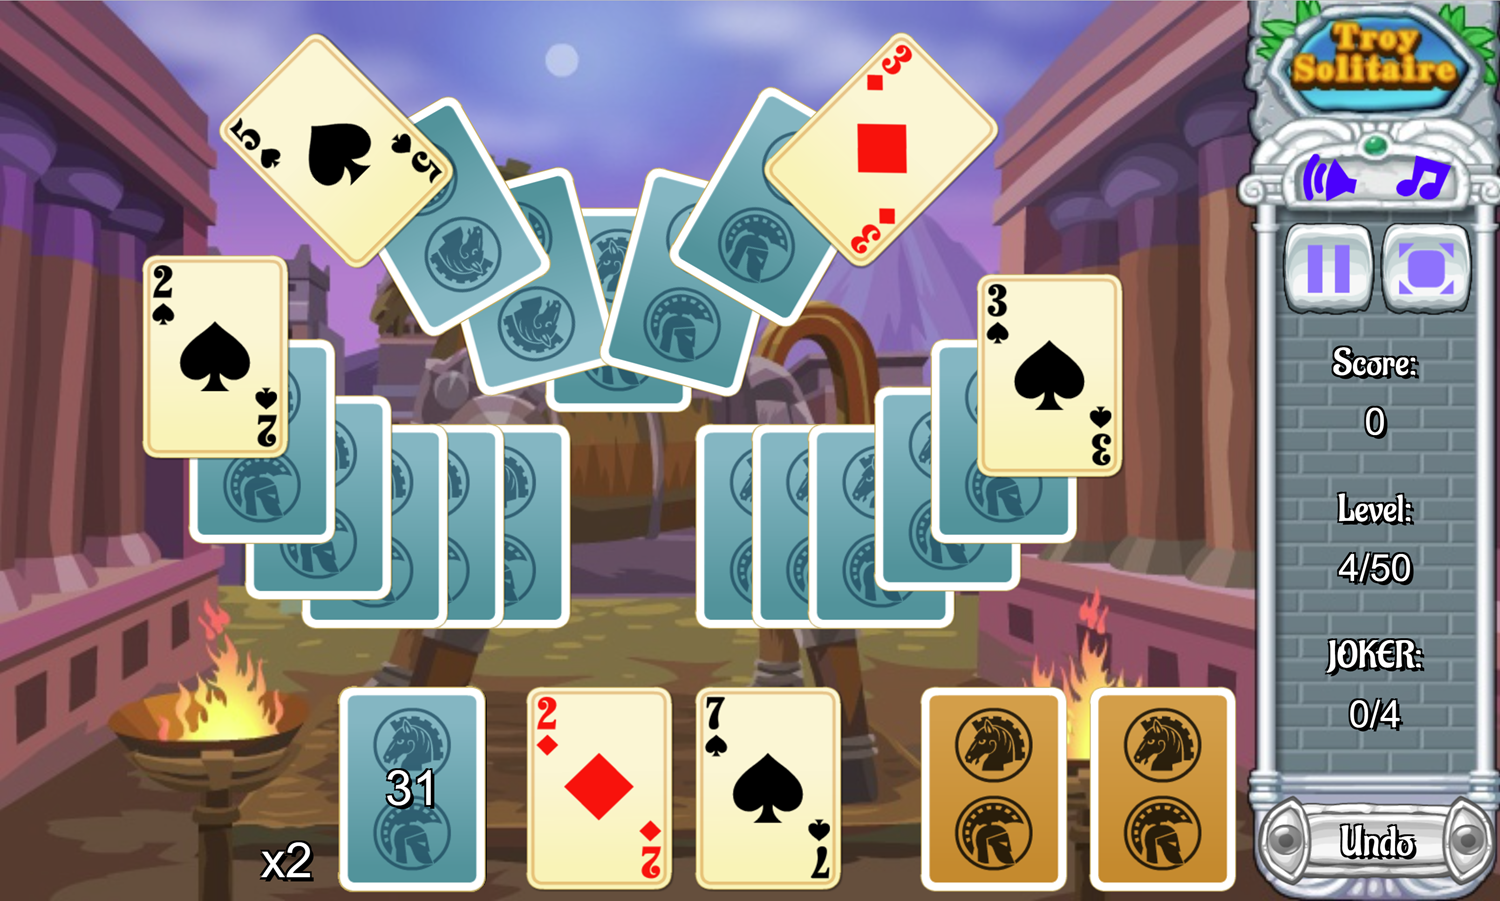 Troy Solitaire Game Screenshot.